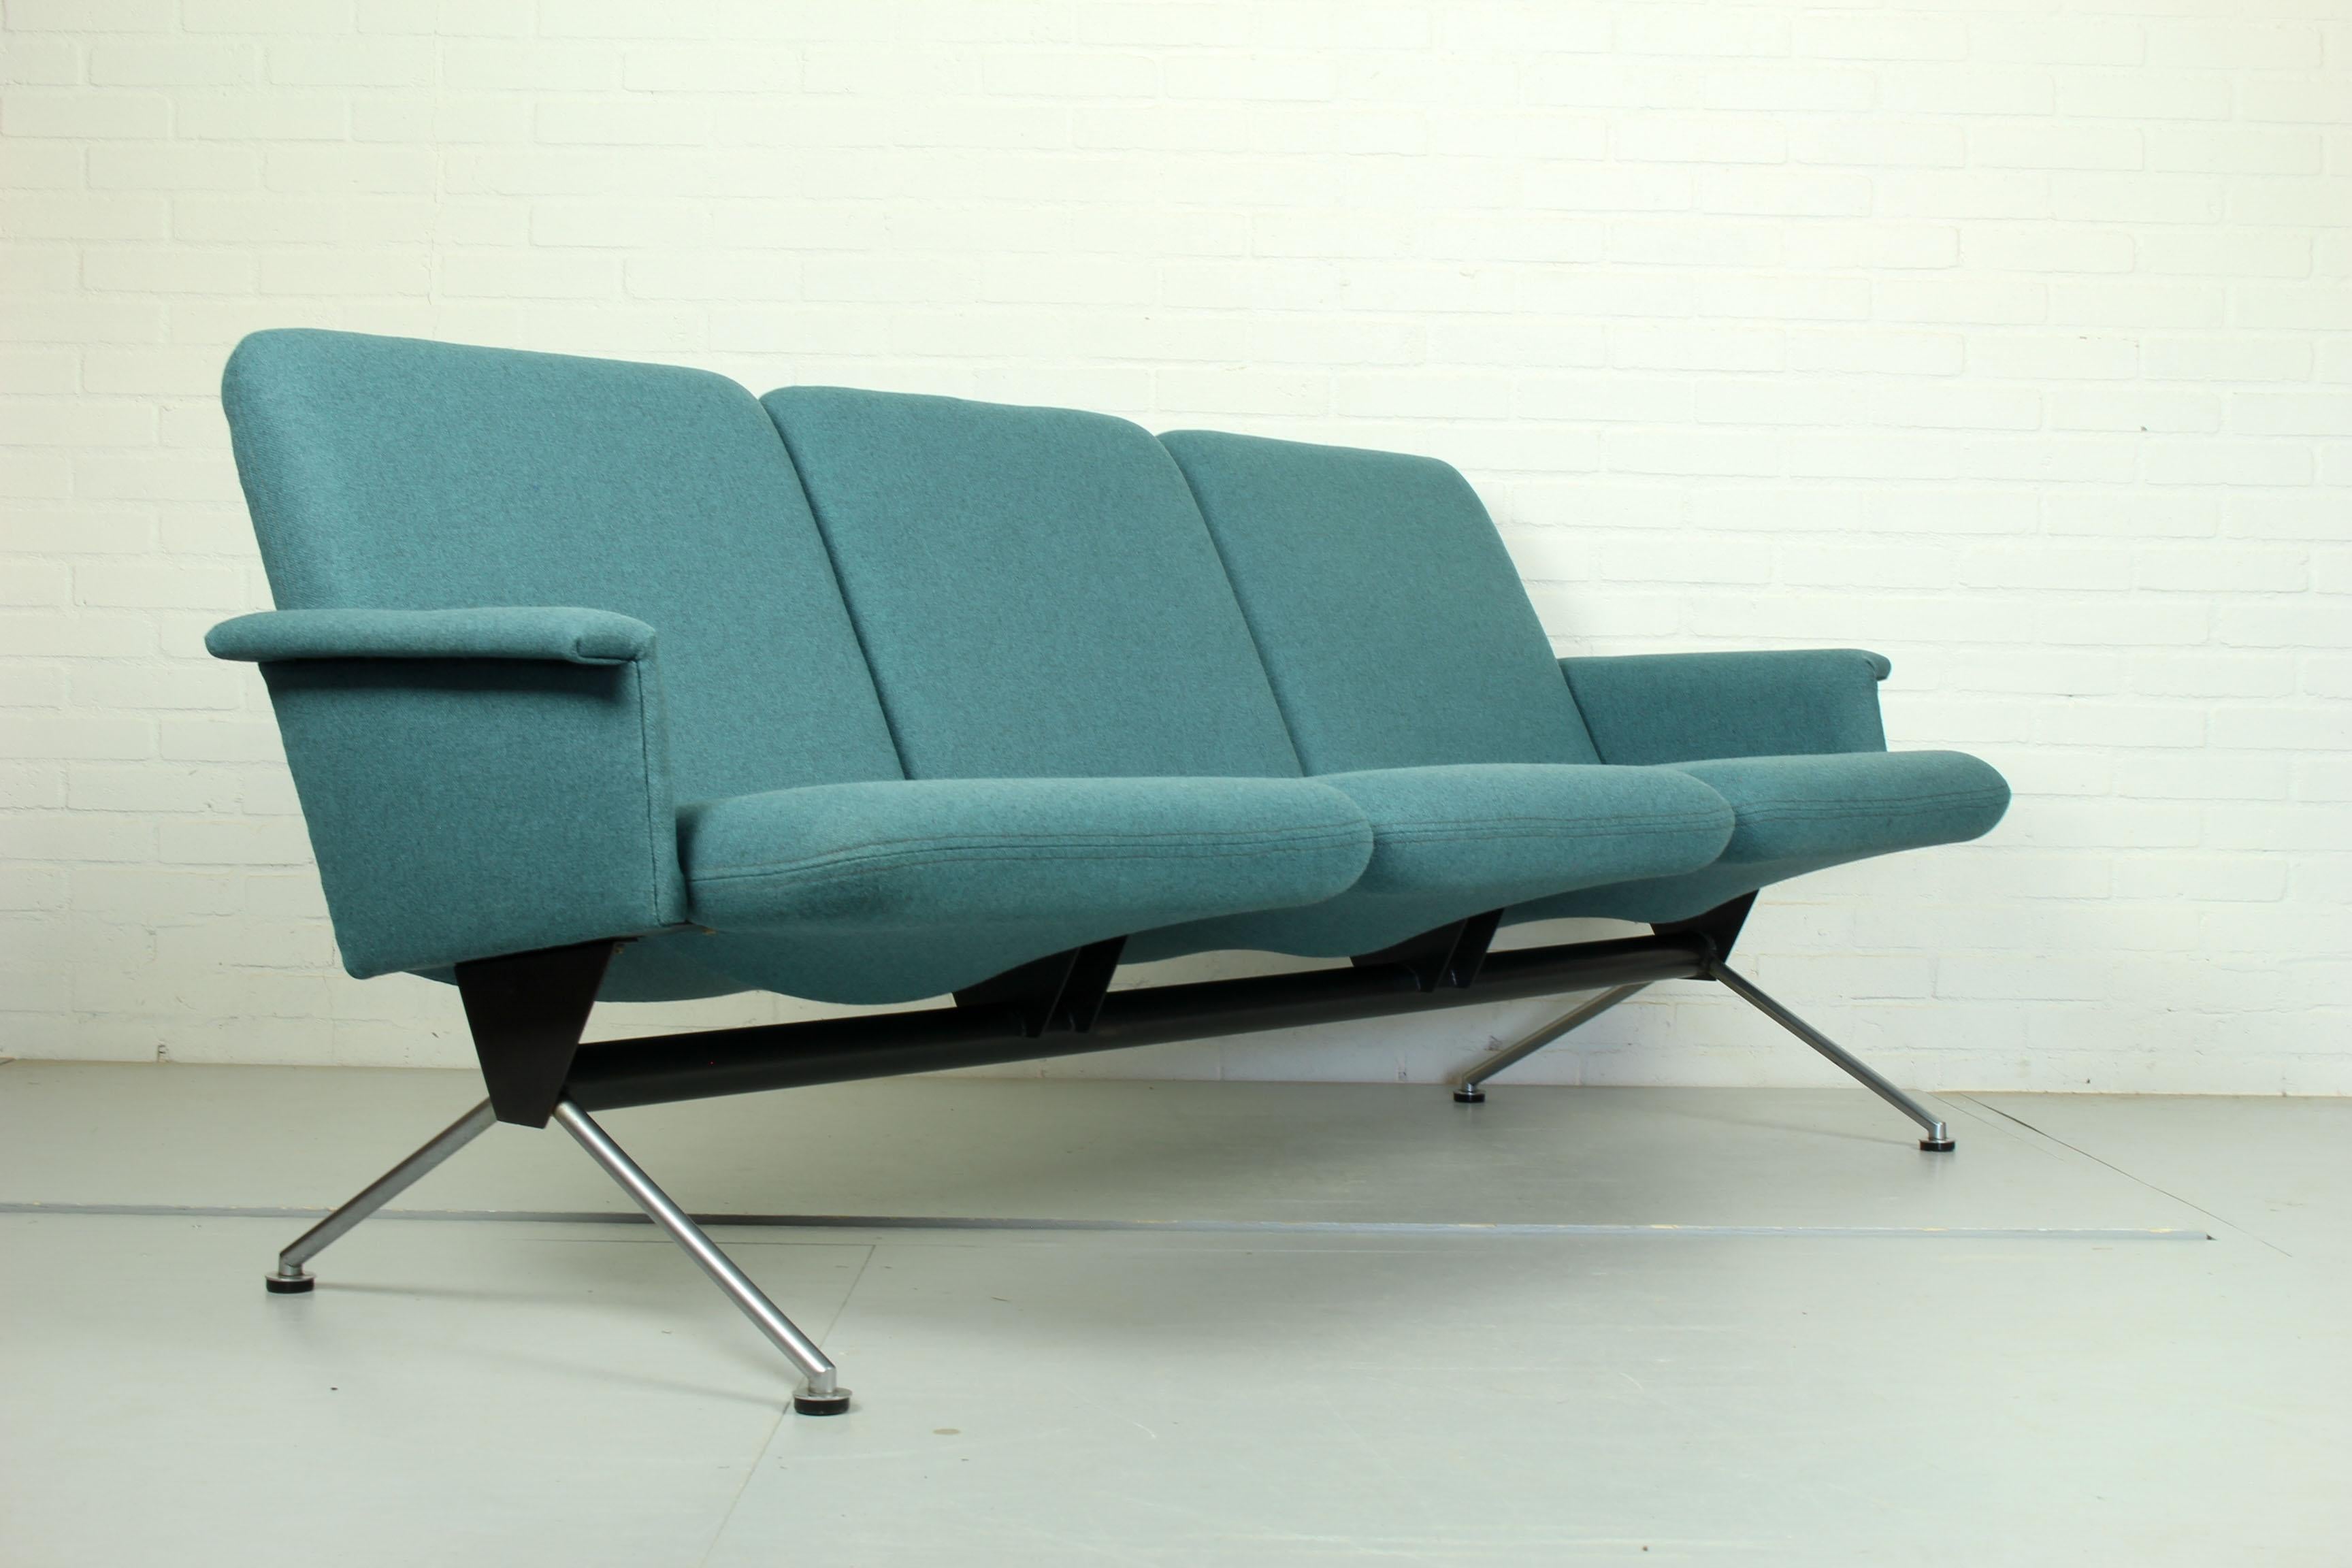 Dutch Lounge Set by Andre Cordemeyer for Gispen, 1432 '2' and 1715, 1961